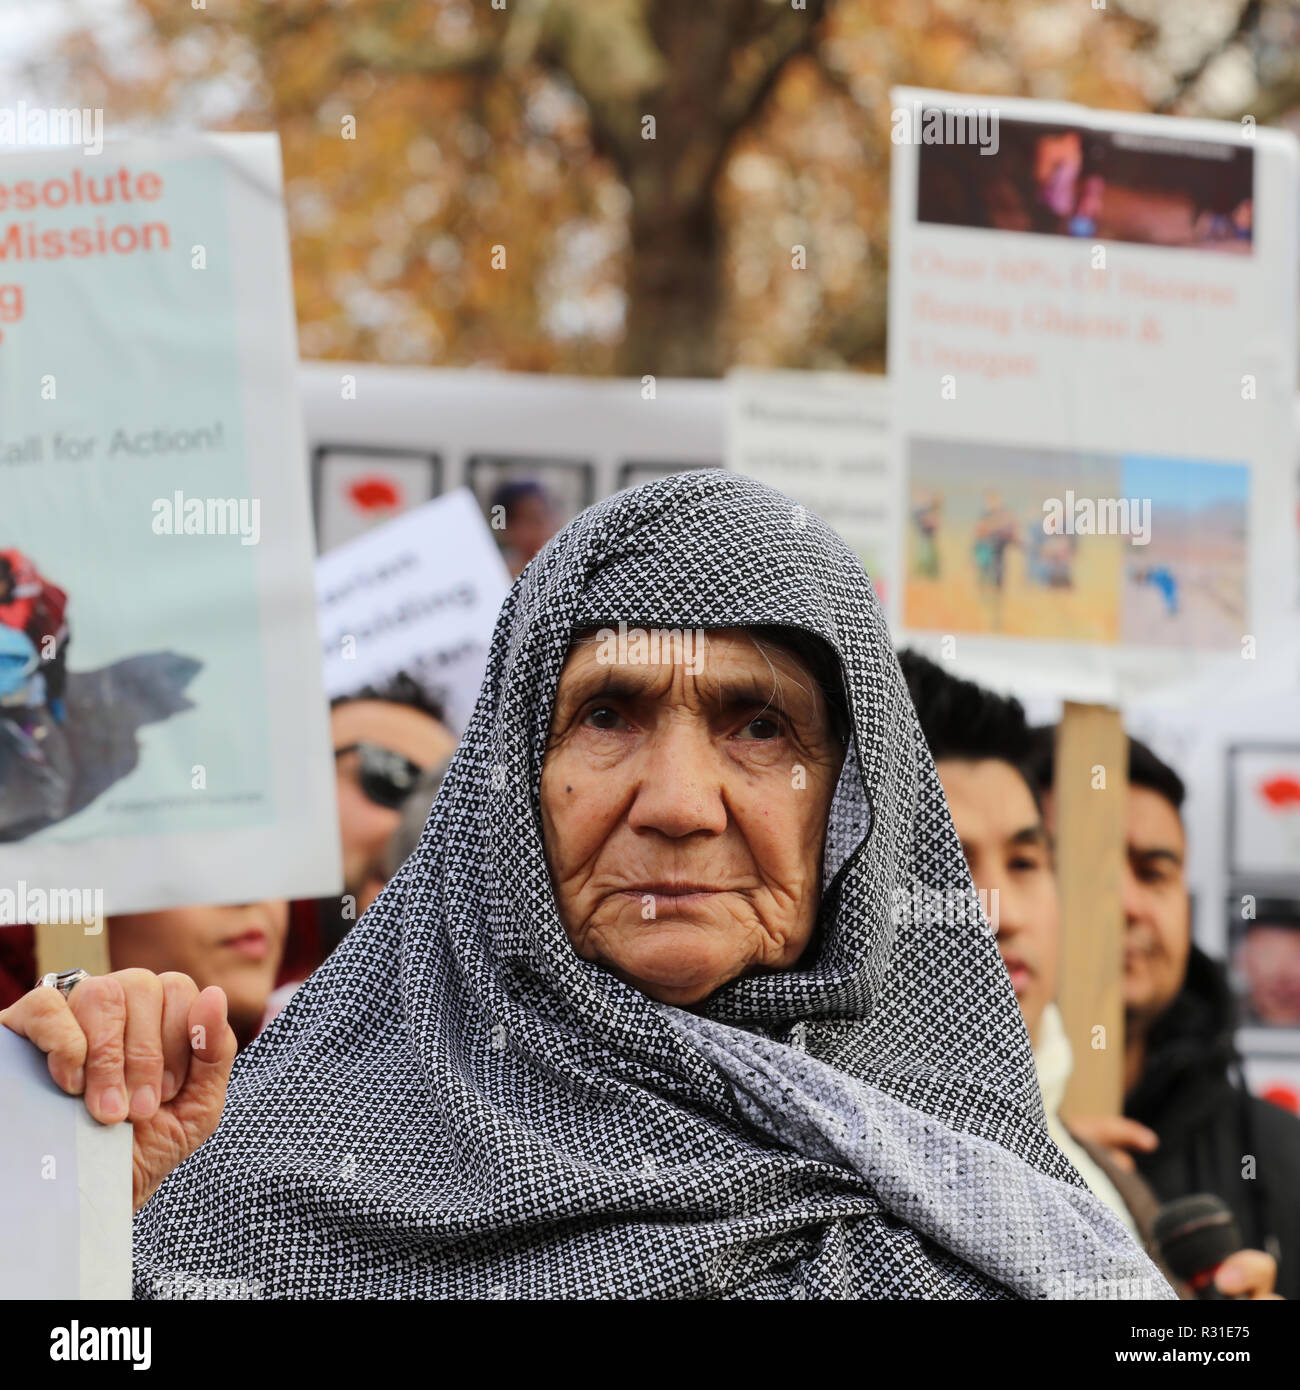 London, UK. 21st November 2018. Protest outside 10 Downing Street, London, UK, by Hazaras, an ethnic minority group in Afghanistan, having, as a Shia minority, suffered over the ages at the hands of the Sunnis, including the Taleban, demanding international protection and humanitarian support. Credit: Joe Kuis / Alamy Live News Stock Photo